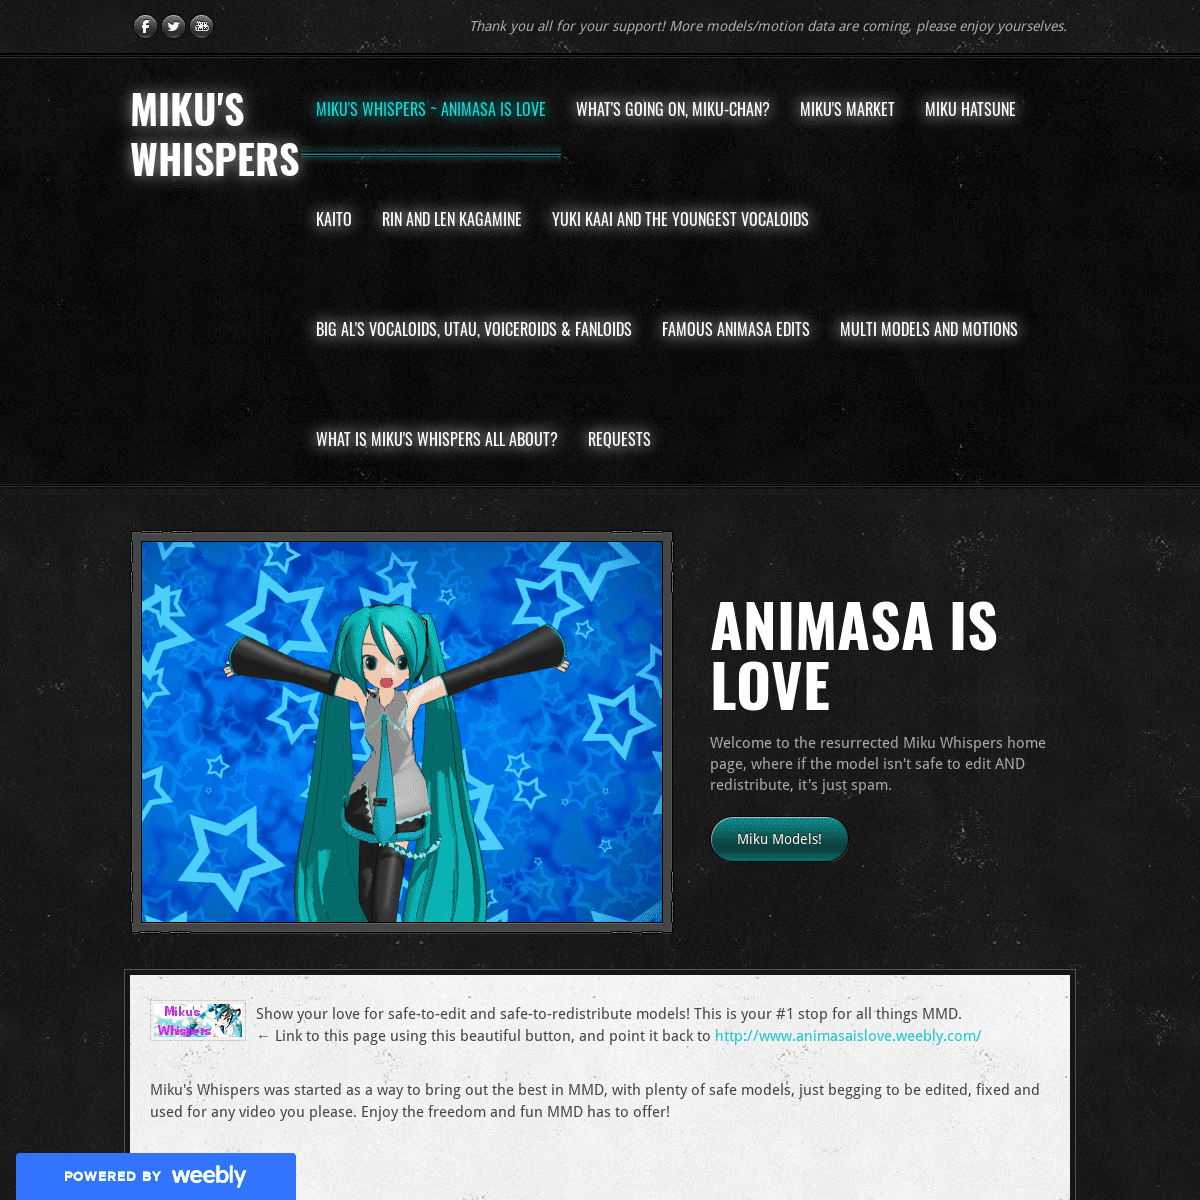 A complete backup of animasaislove.weebly.com